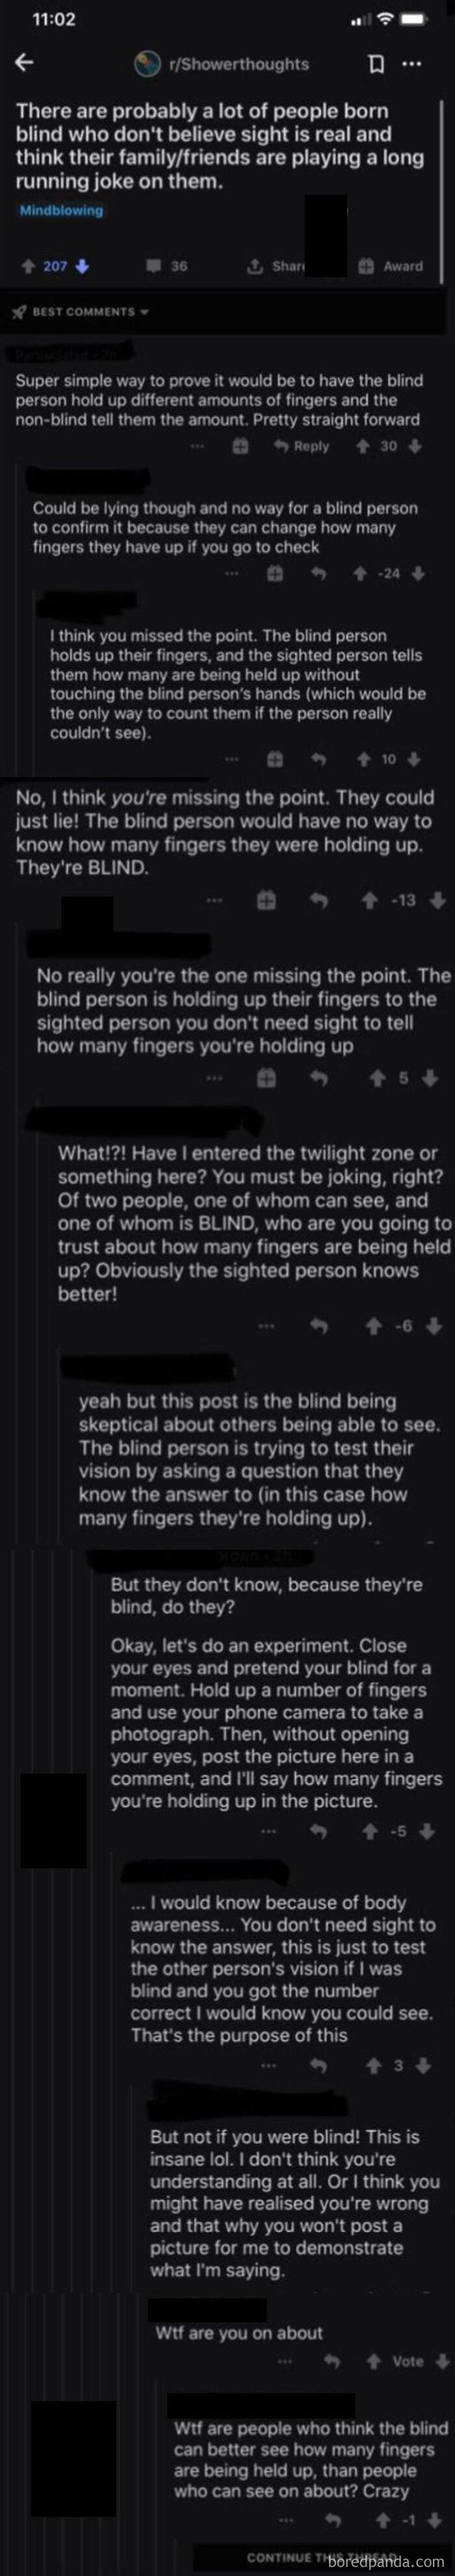 Confidently Argued Blind People Couldn't Feel Their Own Fingers